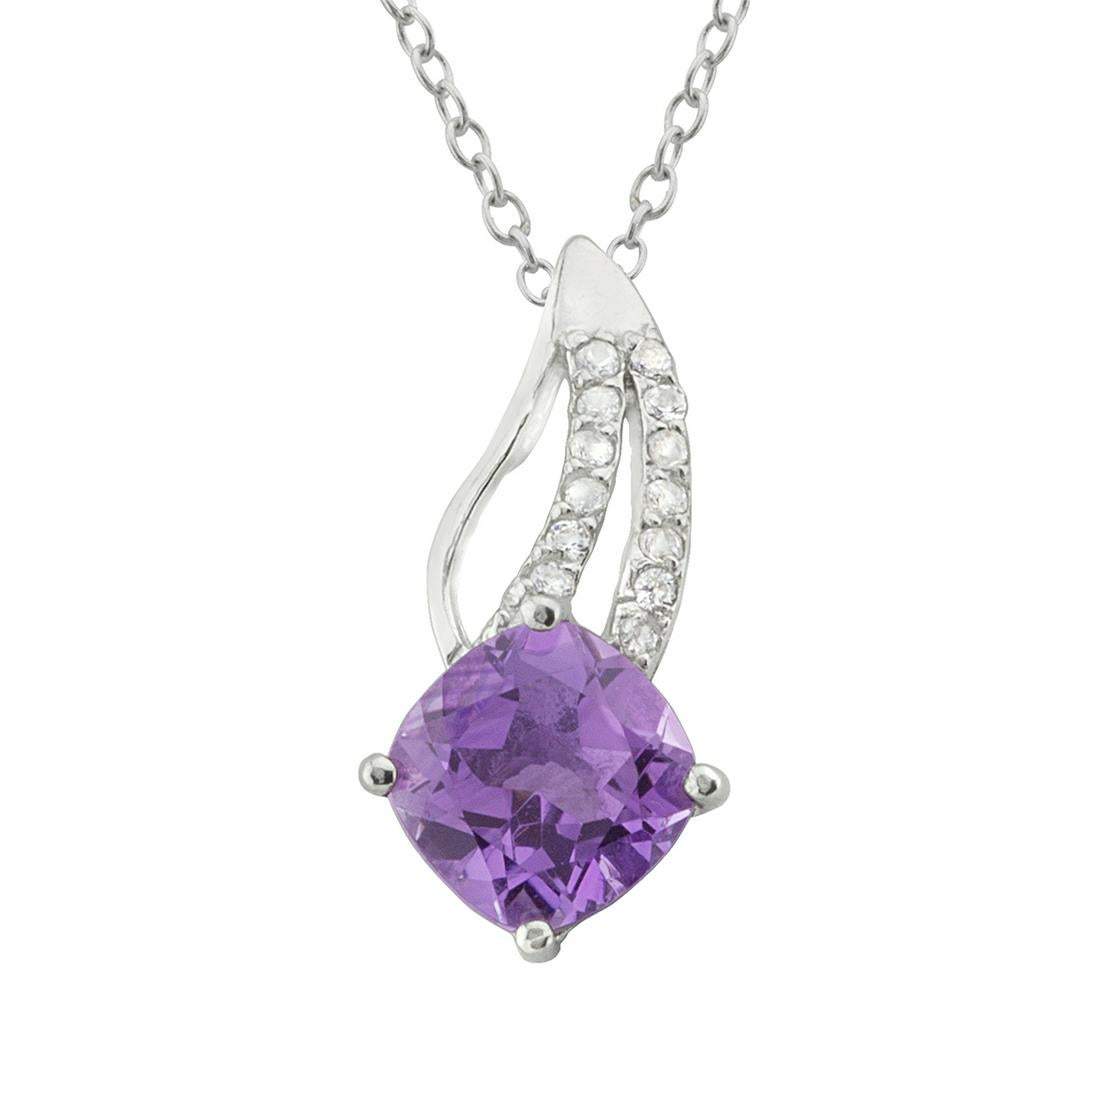 Sterling Silver Amethyst & White Topaz Swirl Pendant Necklace - Shop Thrifty Treasures